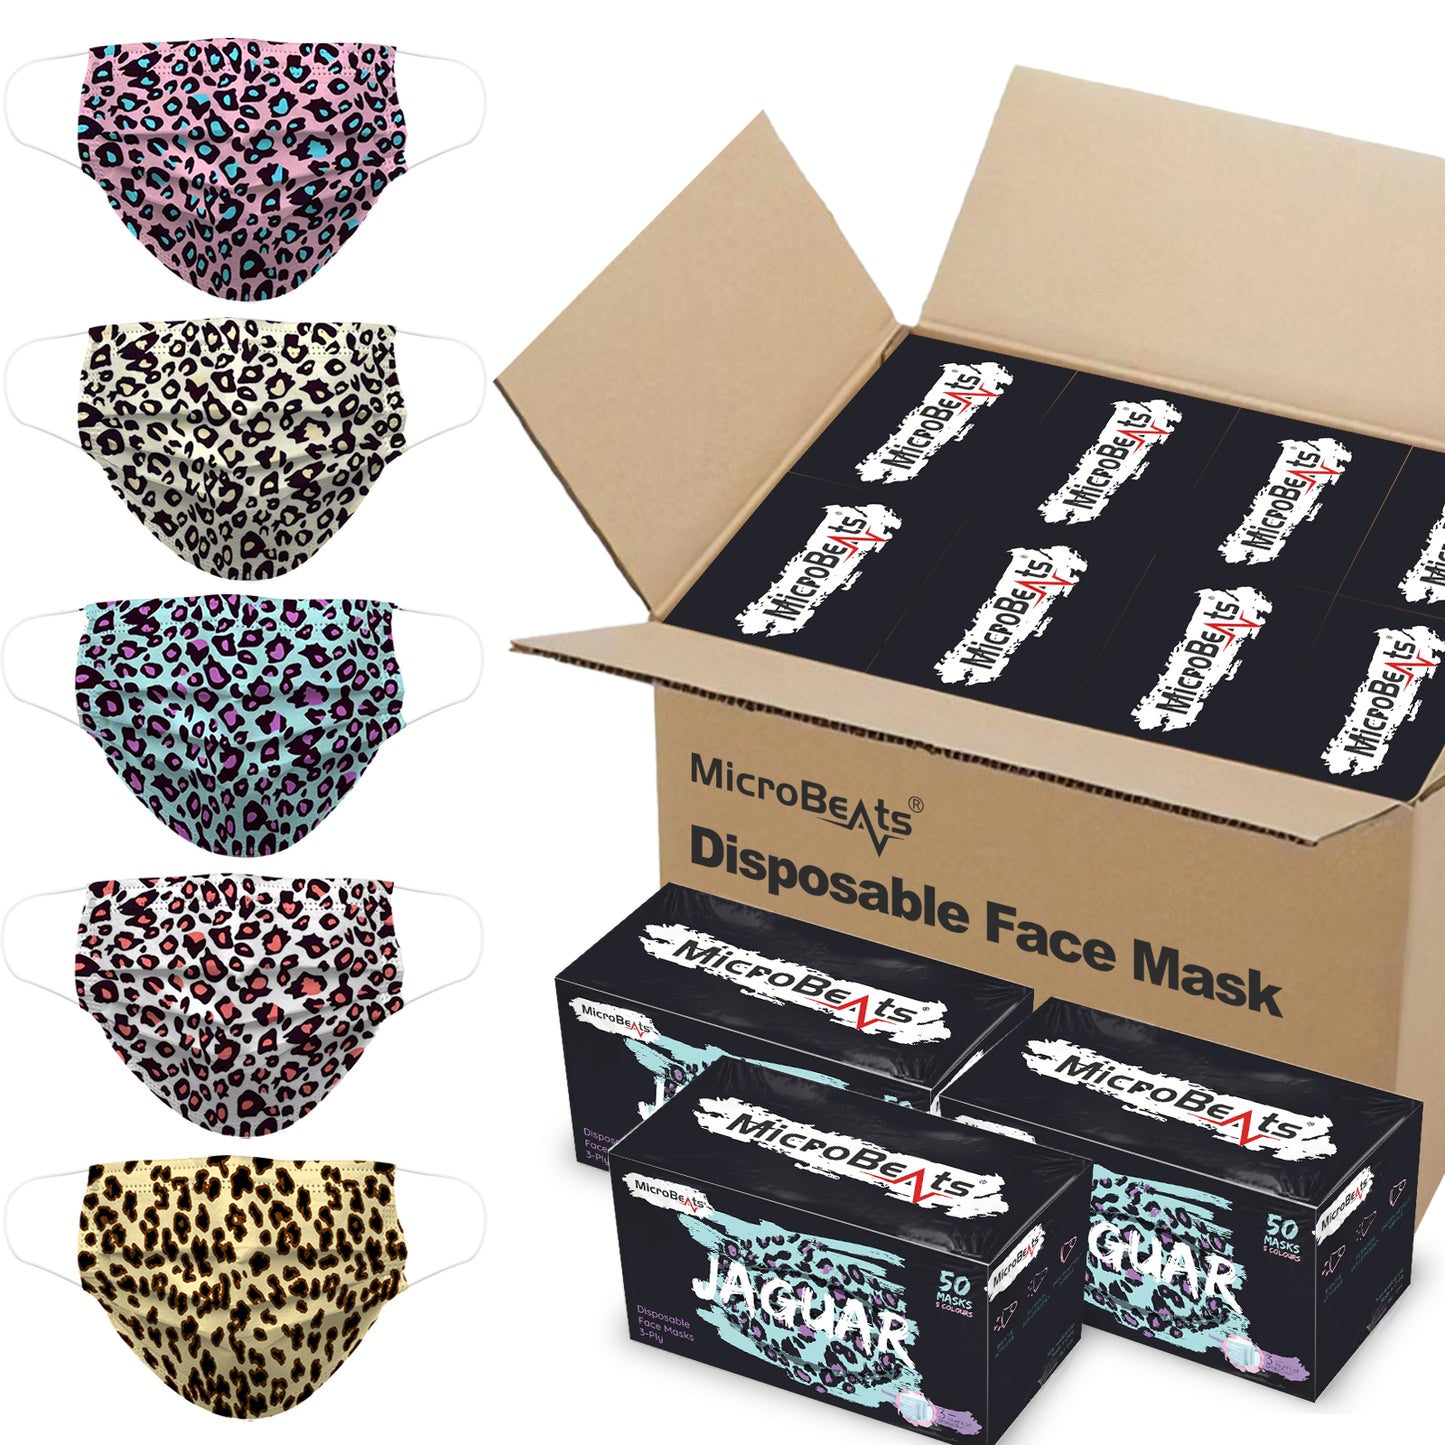 MicroBeats Disposable Face Mask Leopard Grain for Adult 2000 Pack